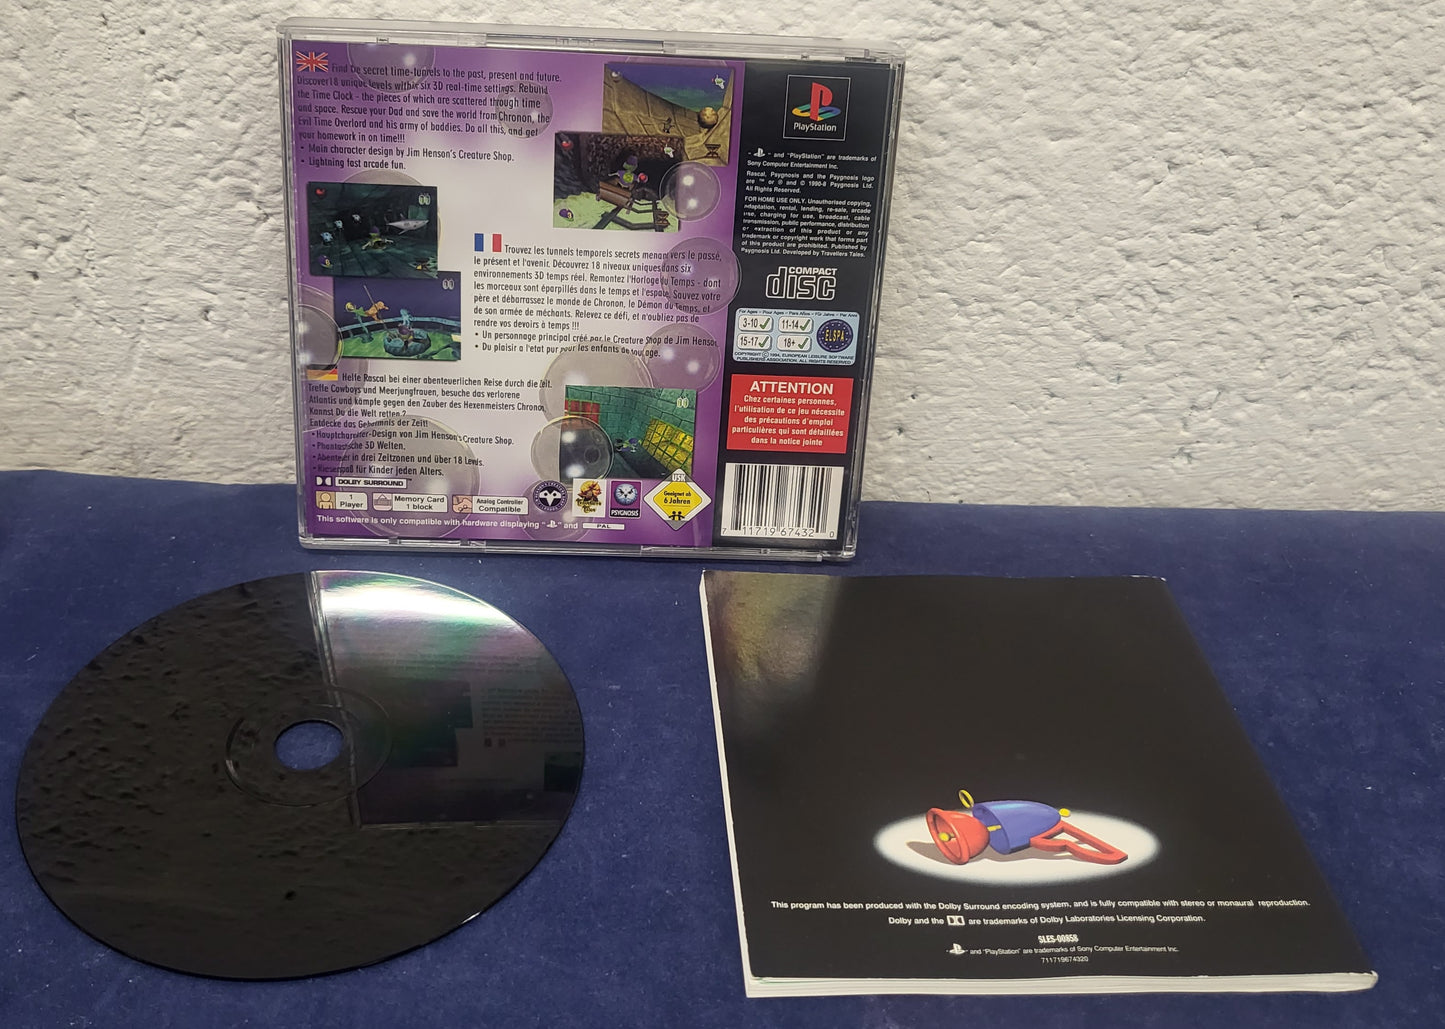 Rascal Sony Playstation 1 (PS1) Game